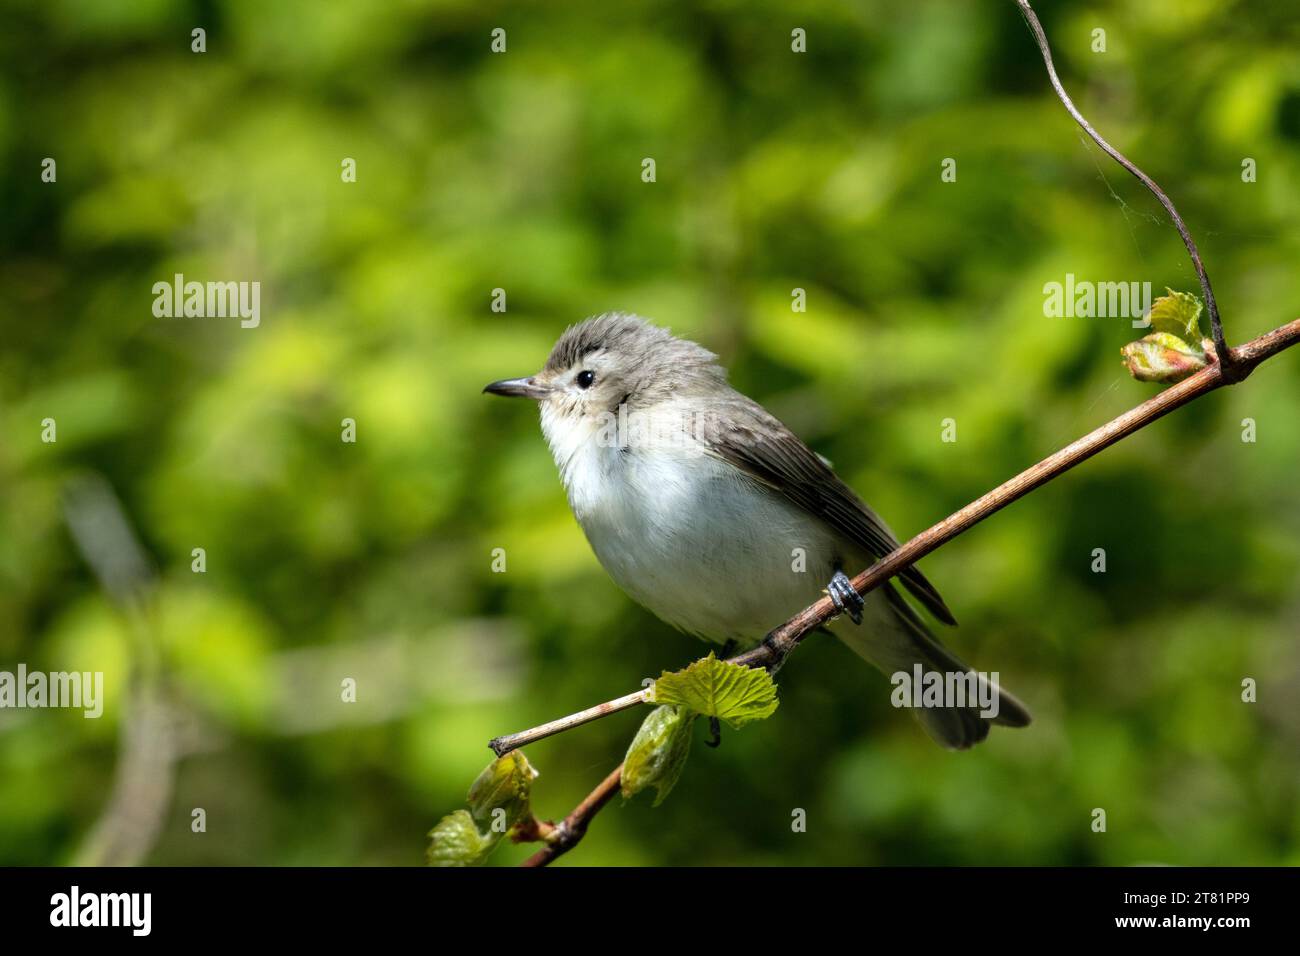 Closeup of Warbling Vireo perching on a leafy branch during spring migration, Long Point, Ontario, Canada Stock Photo